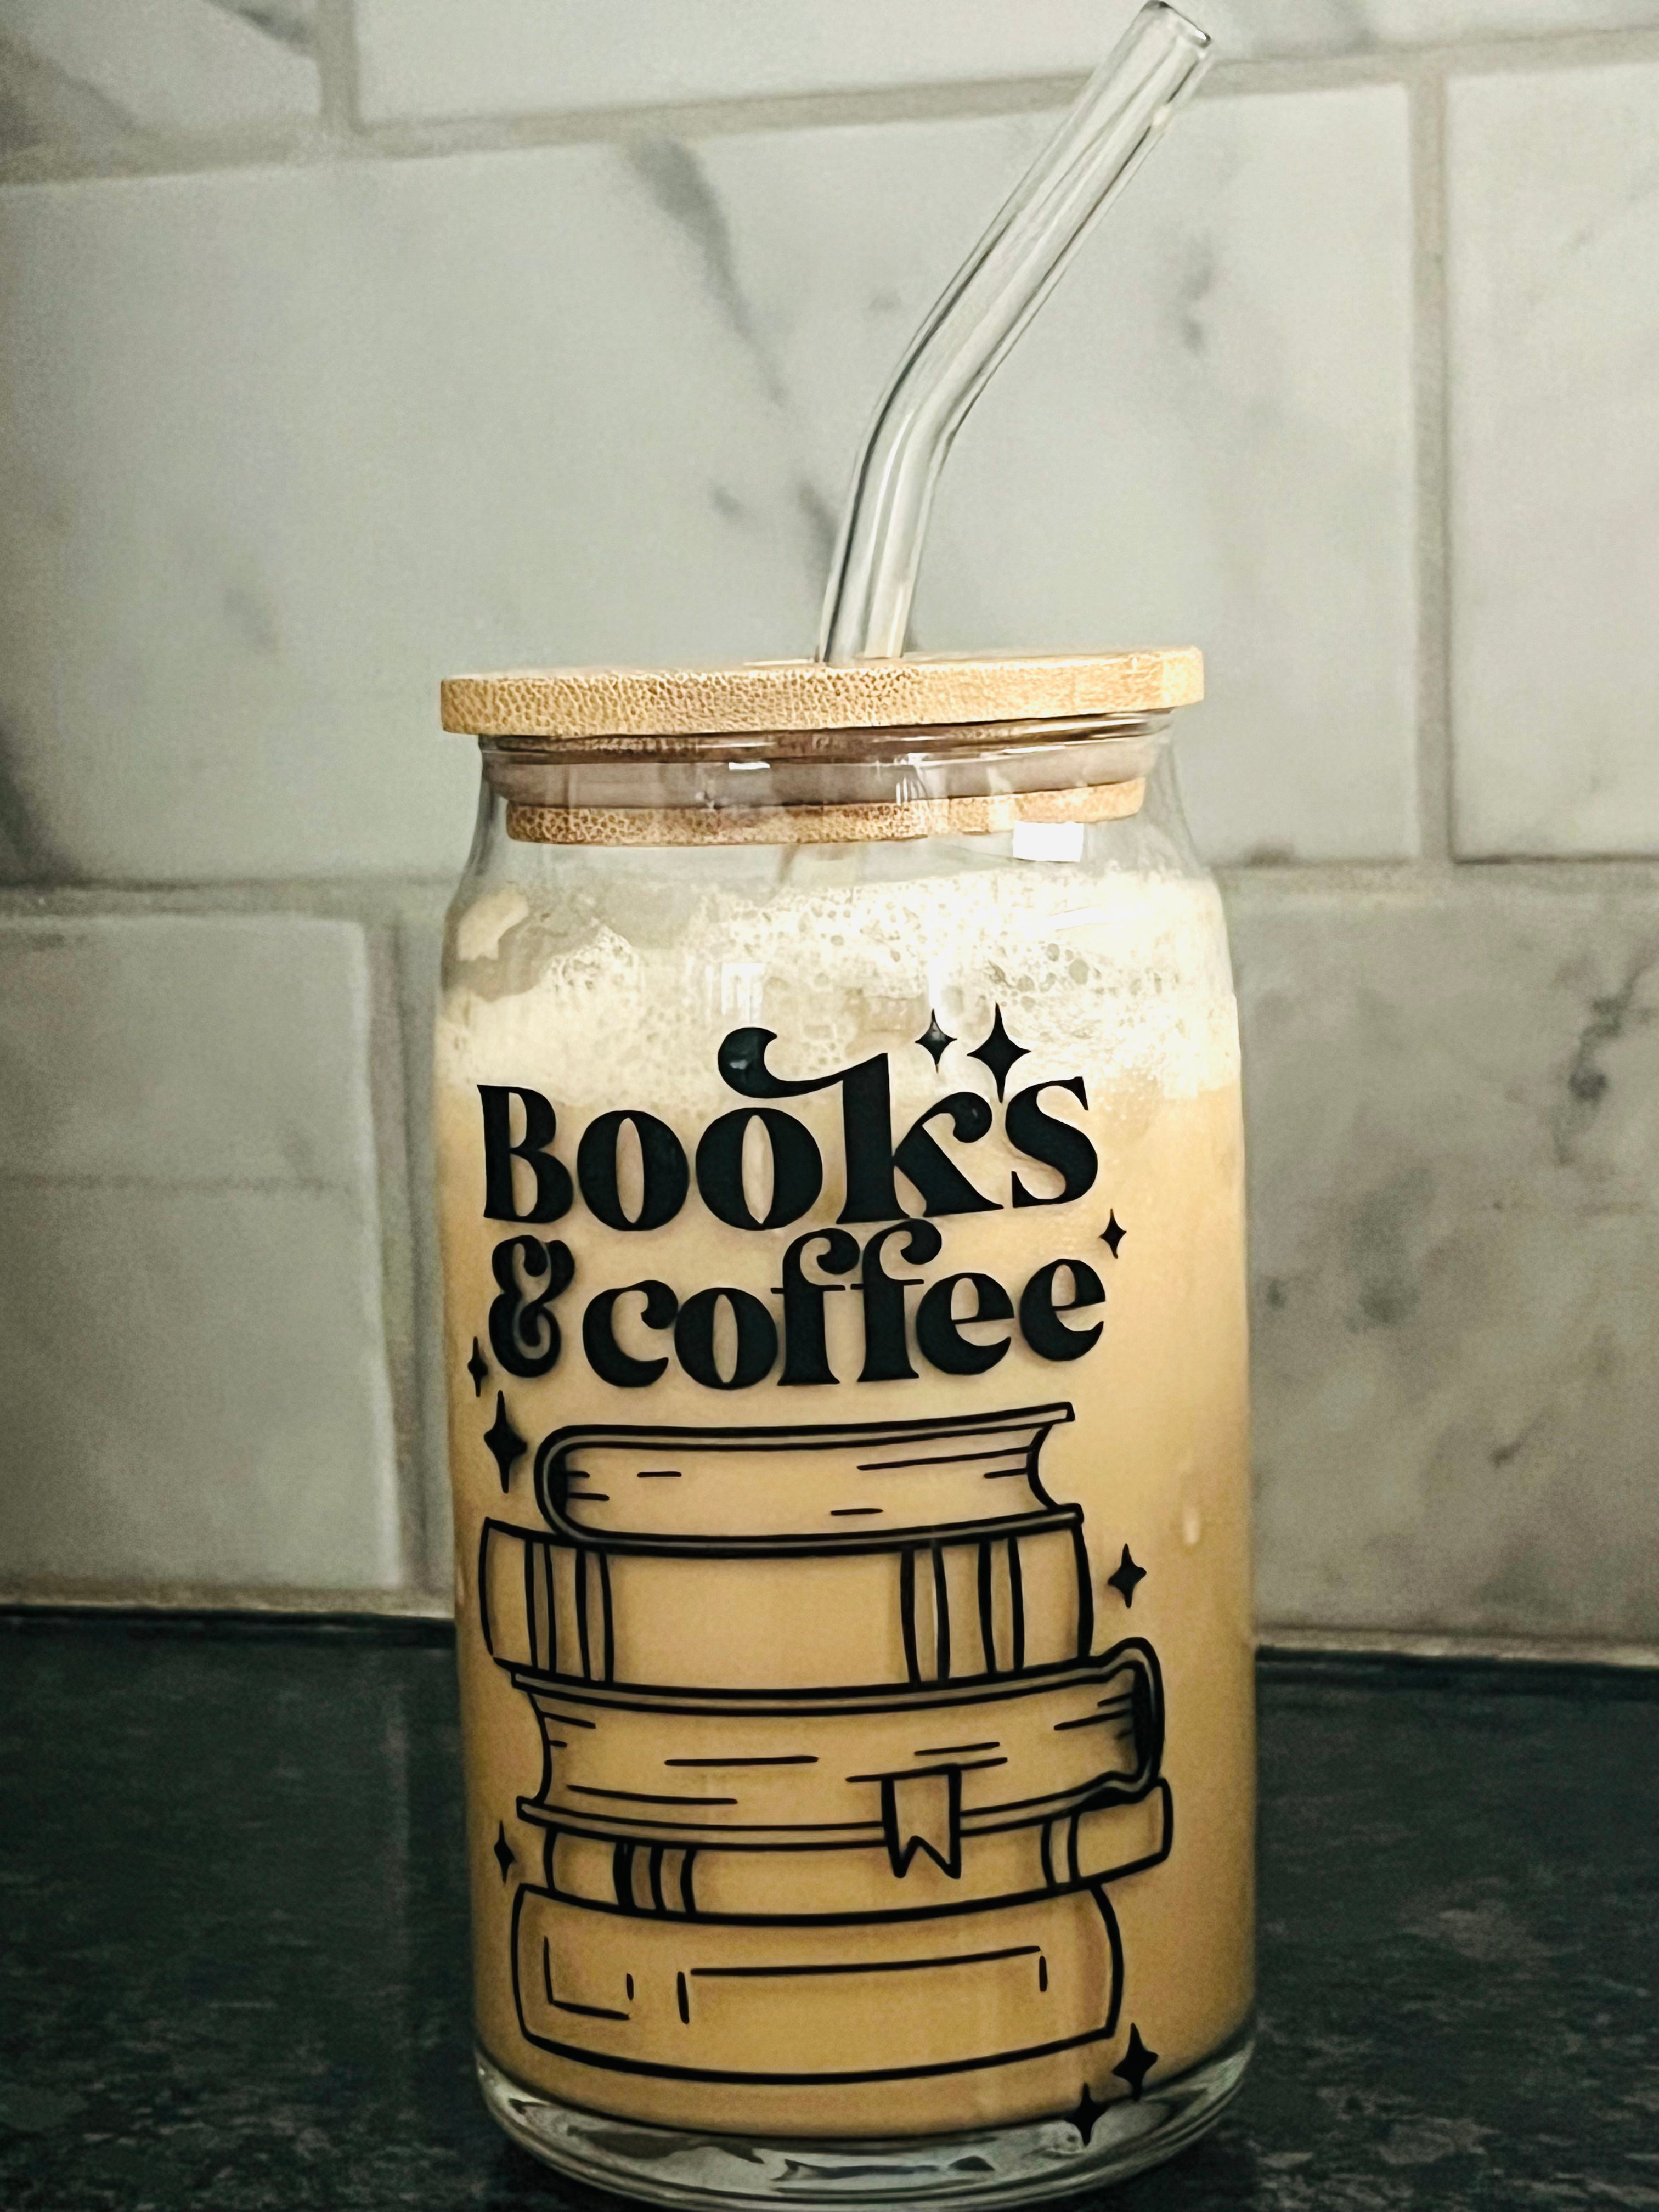 Read Books Drink Coffee Be Happy Cup 16 Oz Can Glass -  in